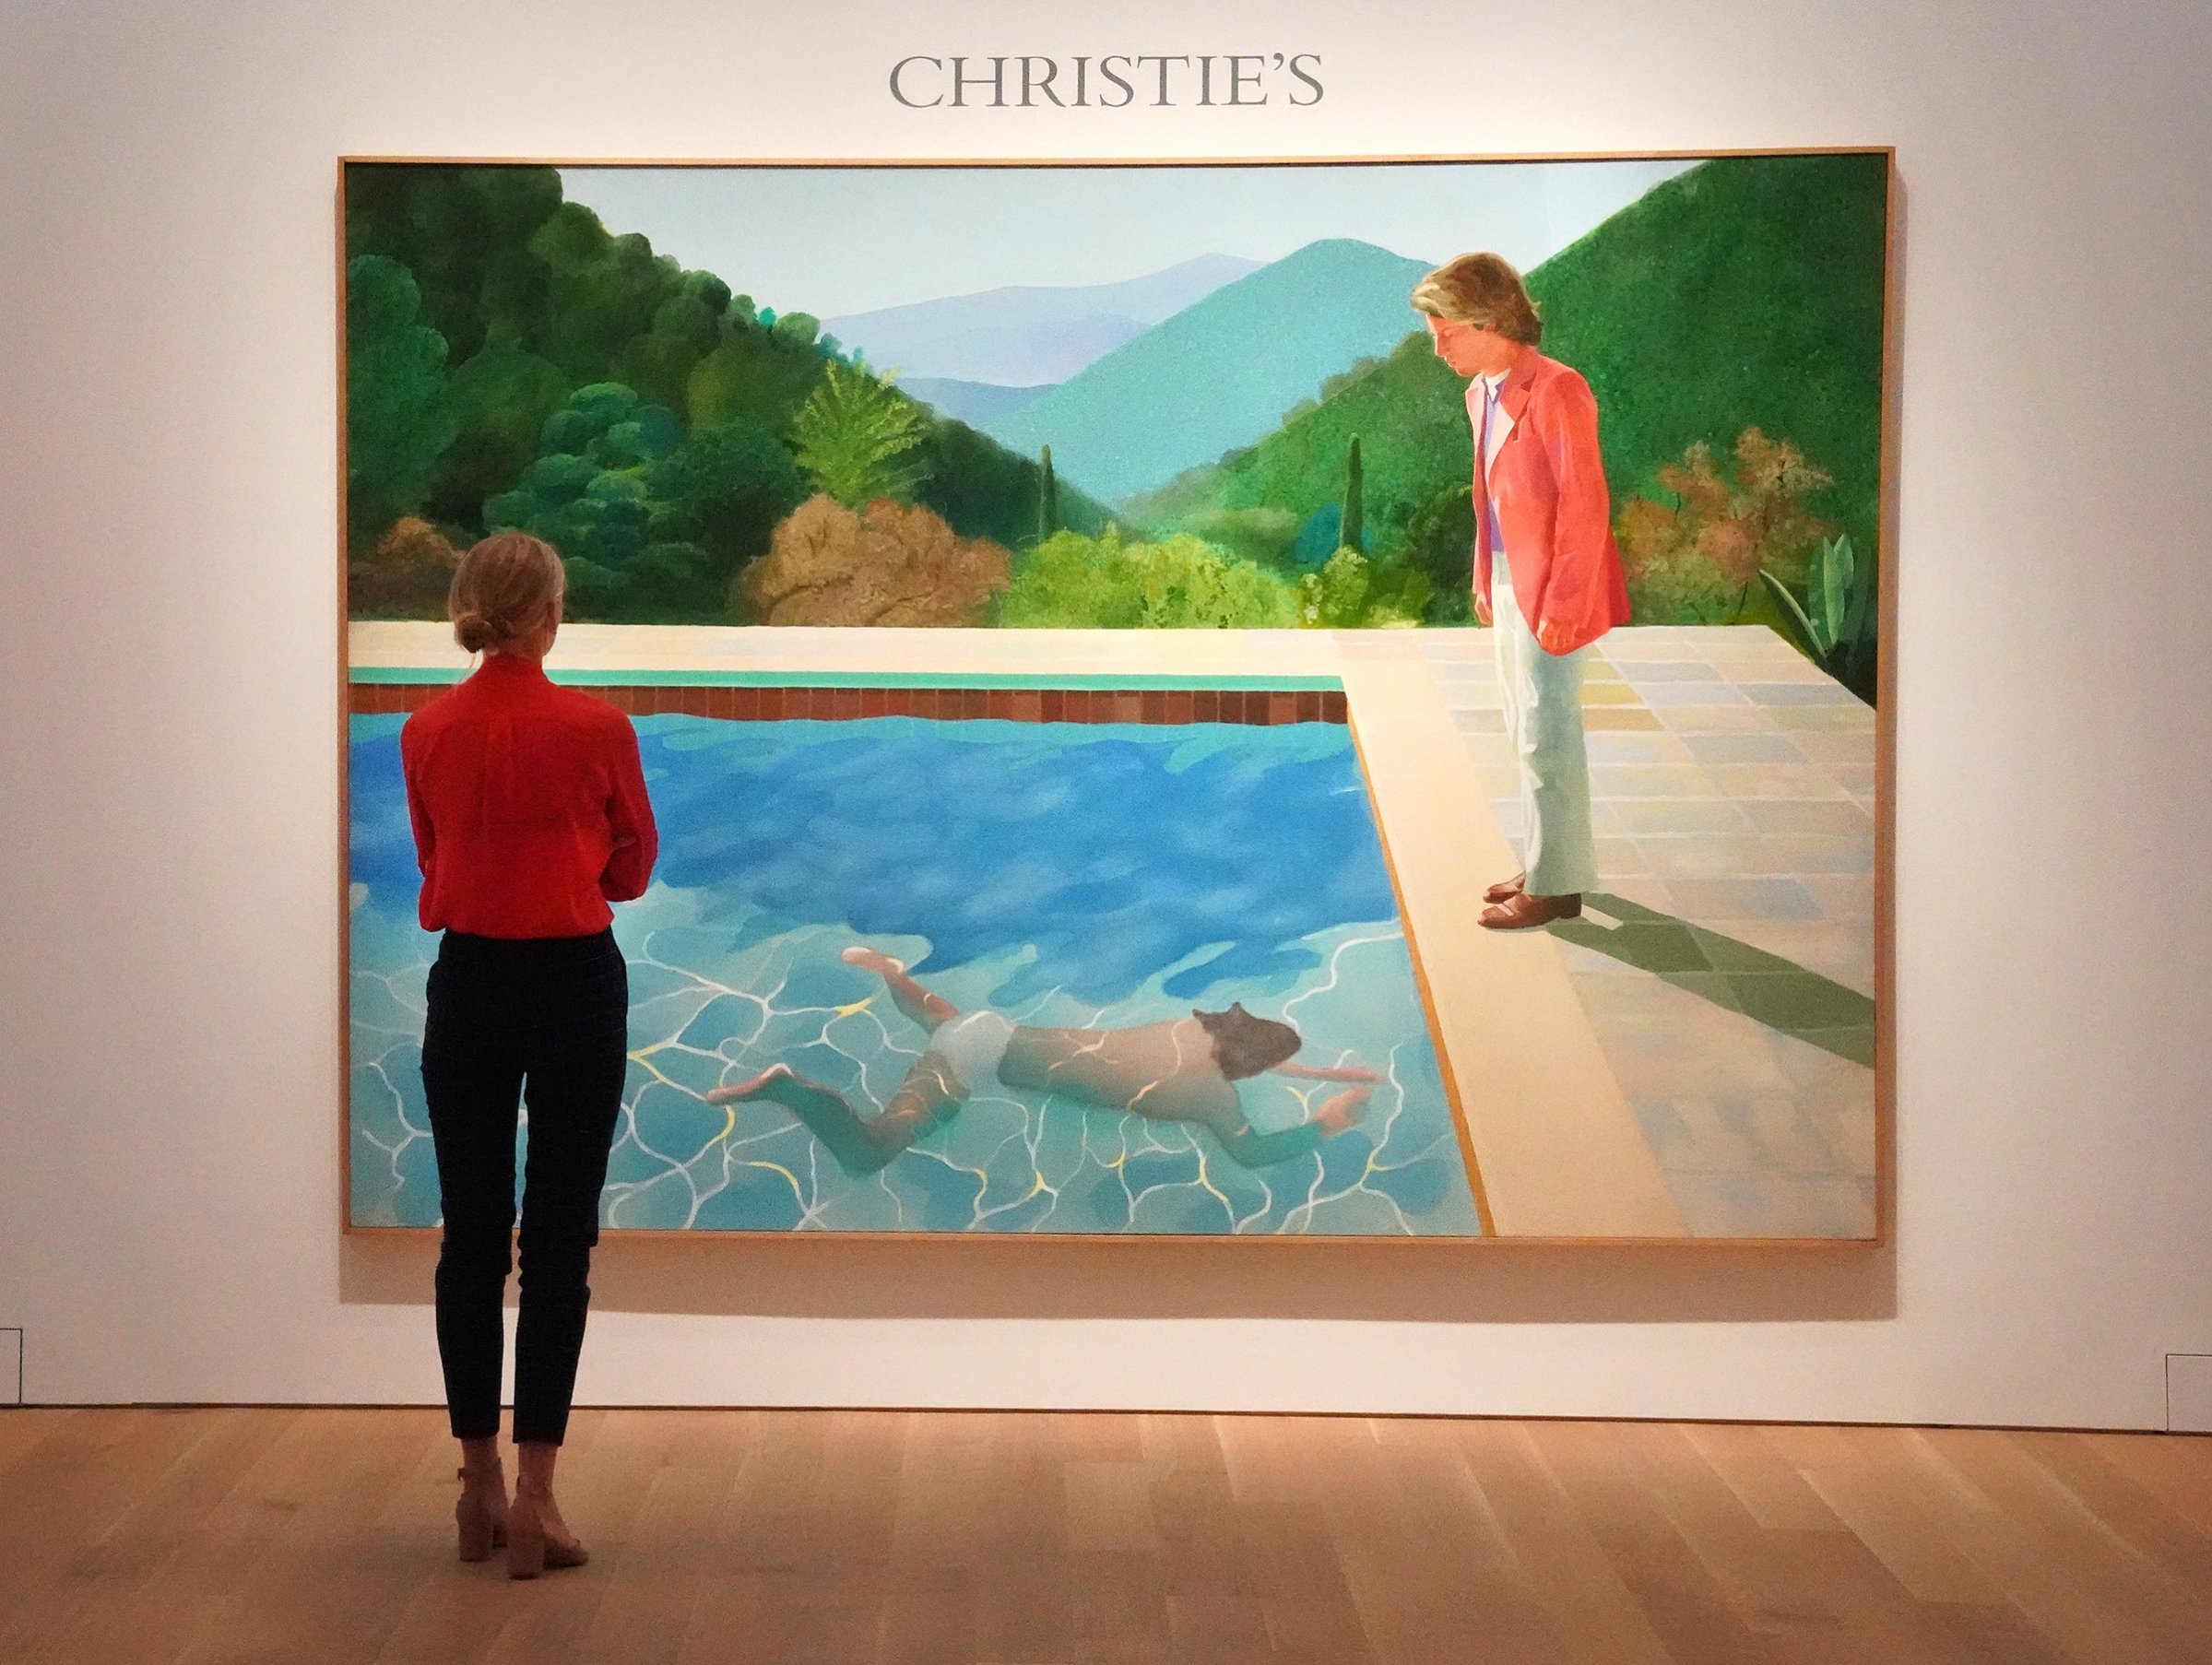 A woman looks at David Hockneys "Portrait of an Artist (Pool with Two Figures)" during a press preview on September 13, 2018 at Christie's New York. - The painting is to be auctioned during Christie's November 2018 Evening Sale of Post-War and Contemporary Art. Christie's expects the painting to sell for 80 million USD, making the work the most valuable piece of art by a living artist ever sold at auction.